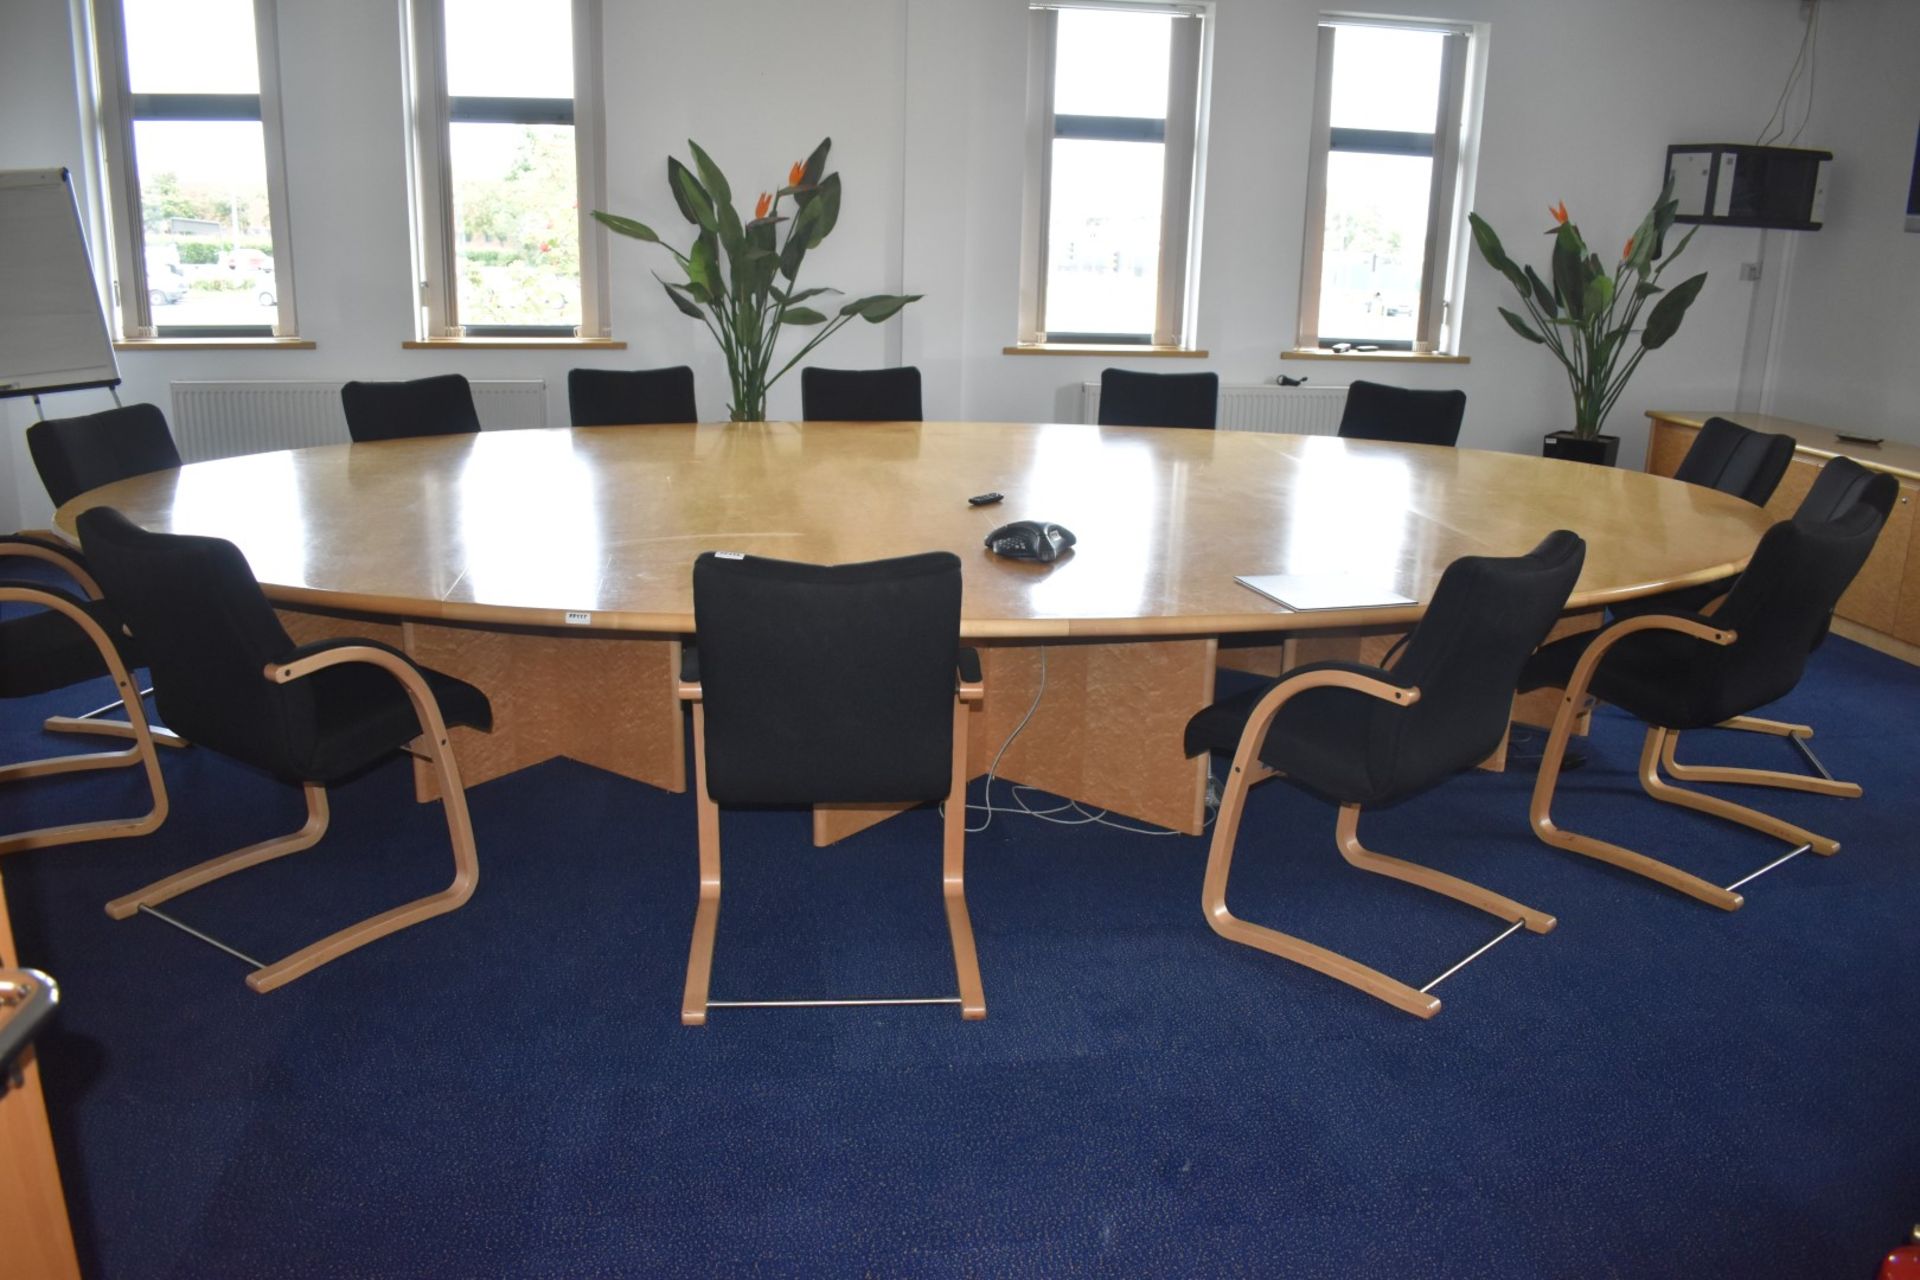 1 x Burr Maple 16ft Office Meeting Table - Spectacular Oval Meeting Table Suitable For Upto 14 - Image 6 of 10